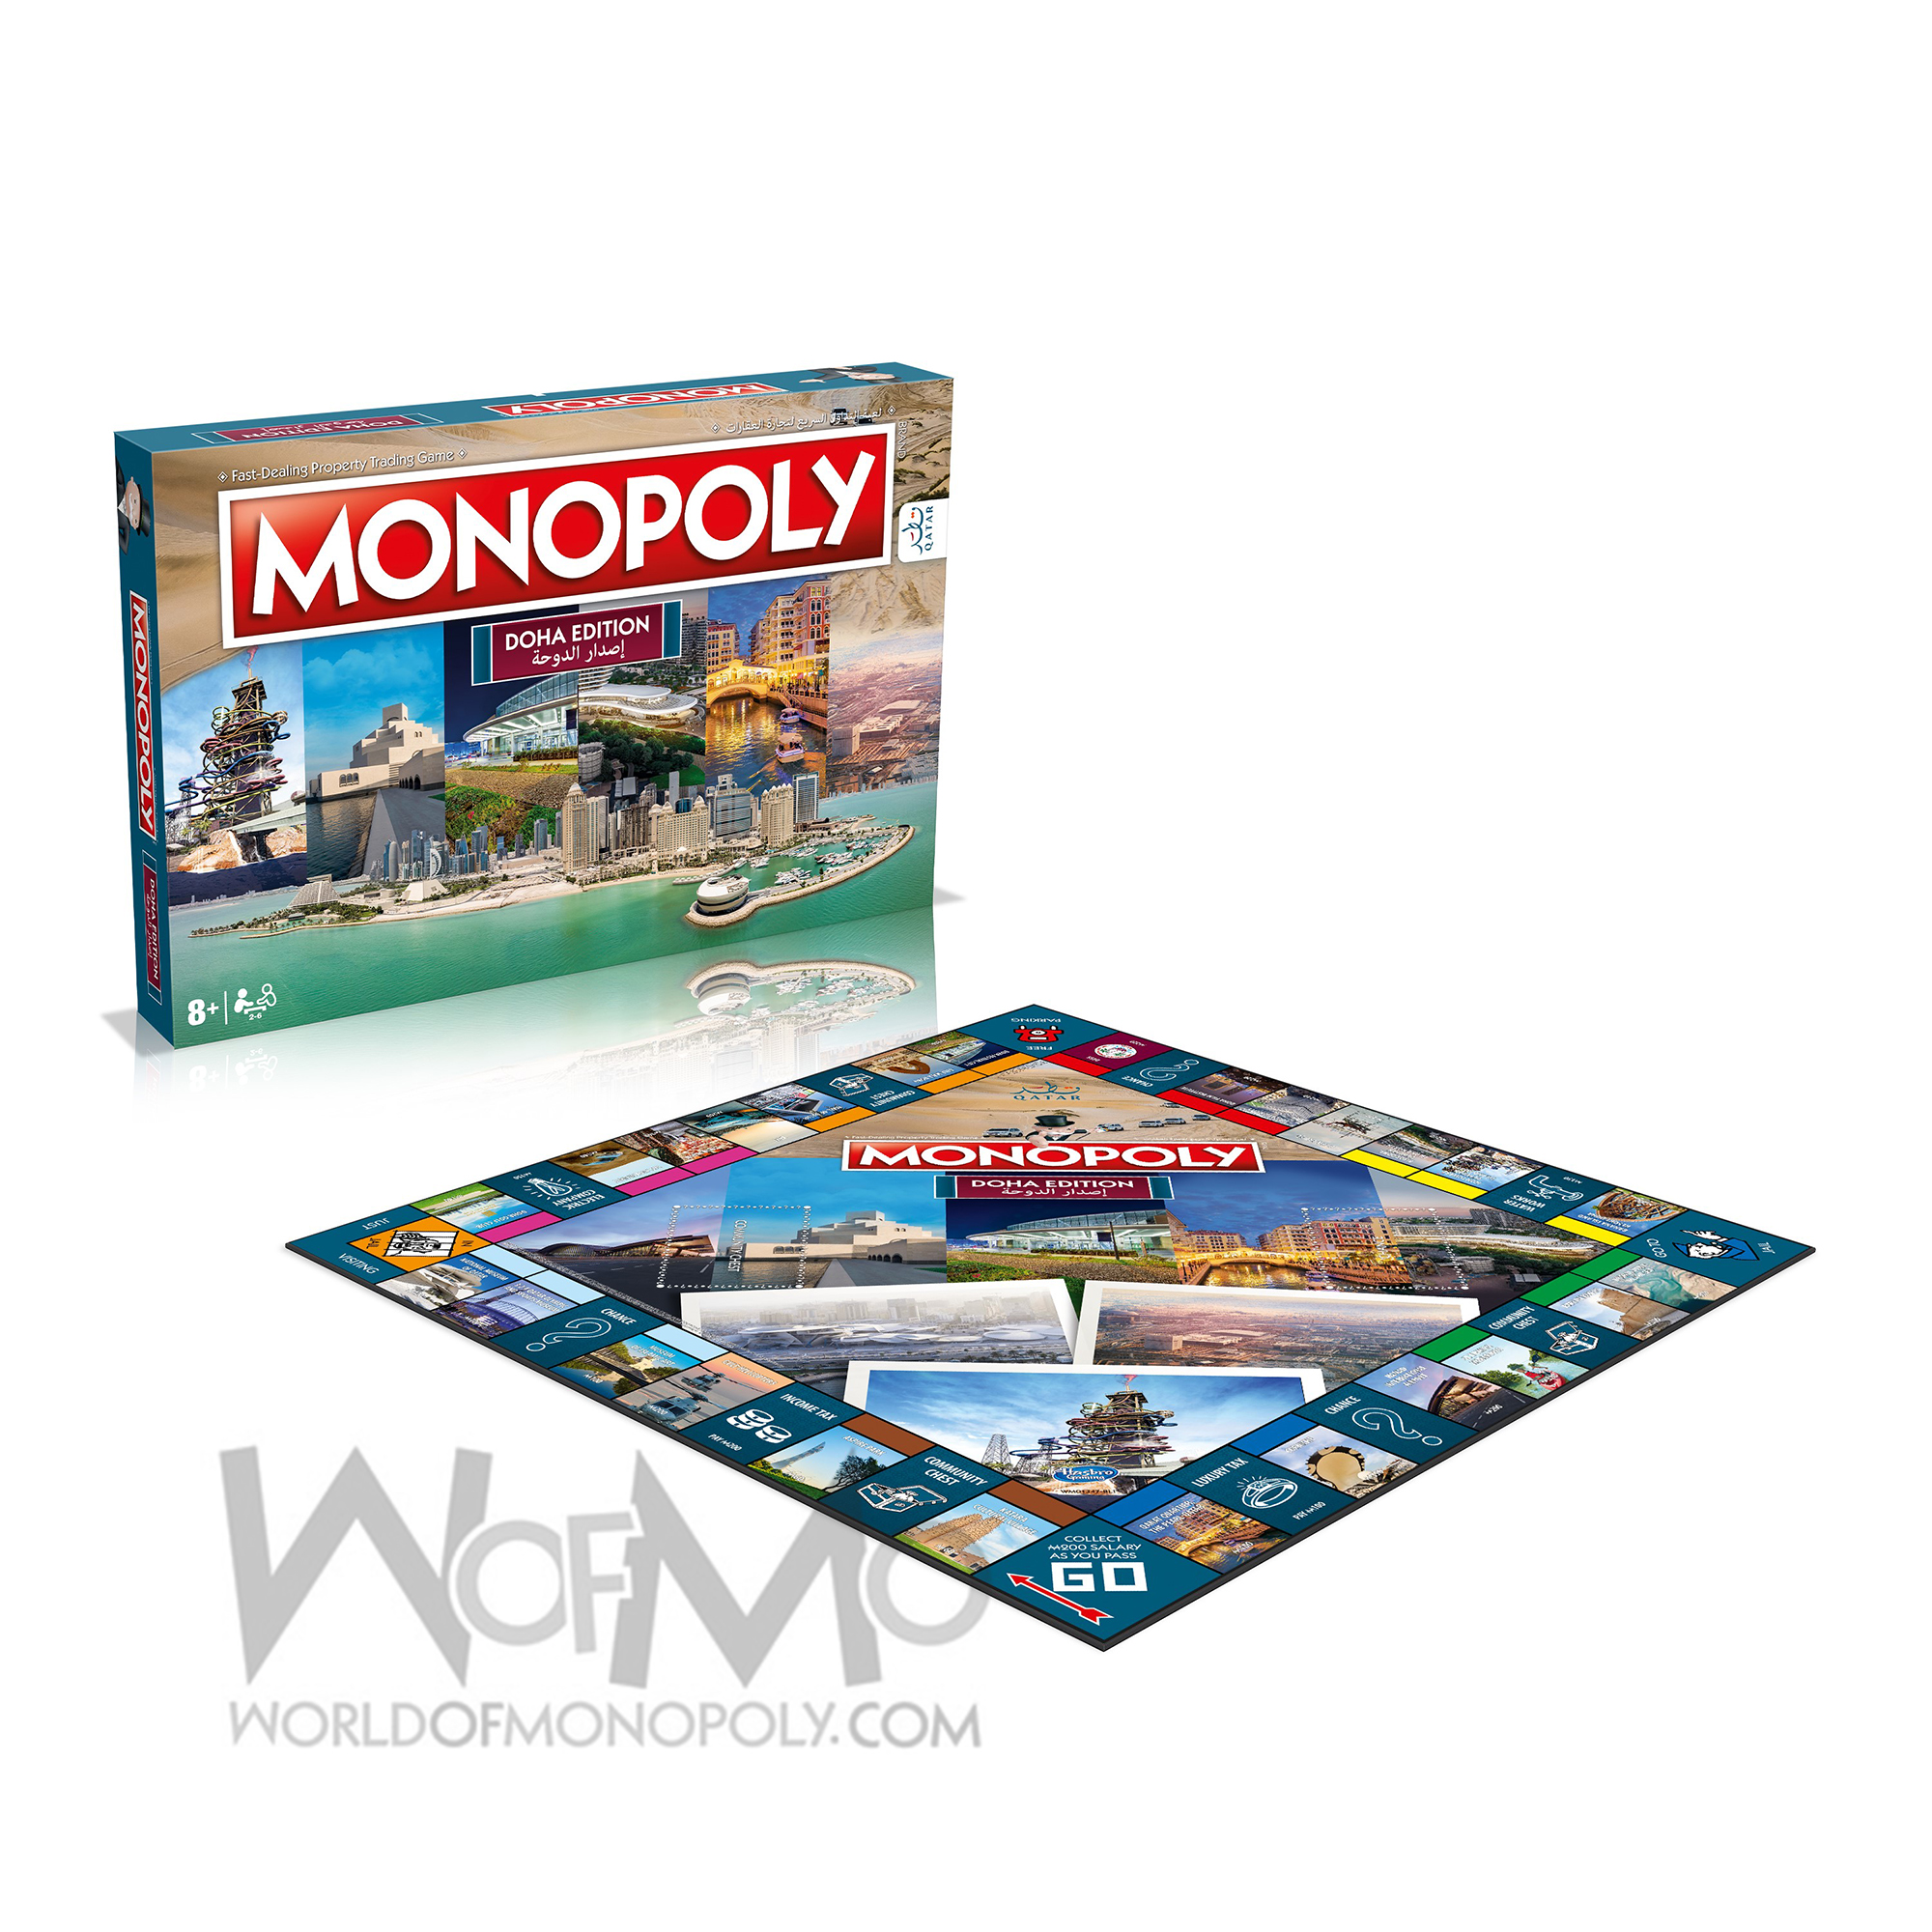 Details about   Monopoly World Edition Lunch Box Qatar Airways Limited Edition Red 